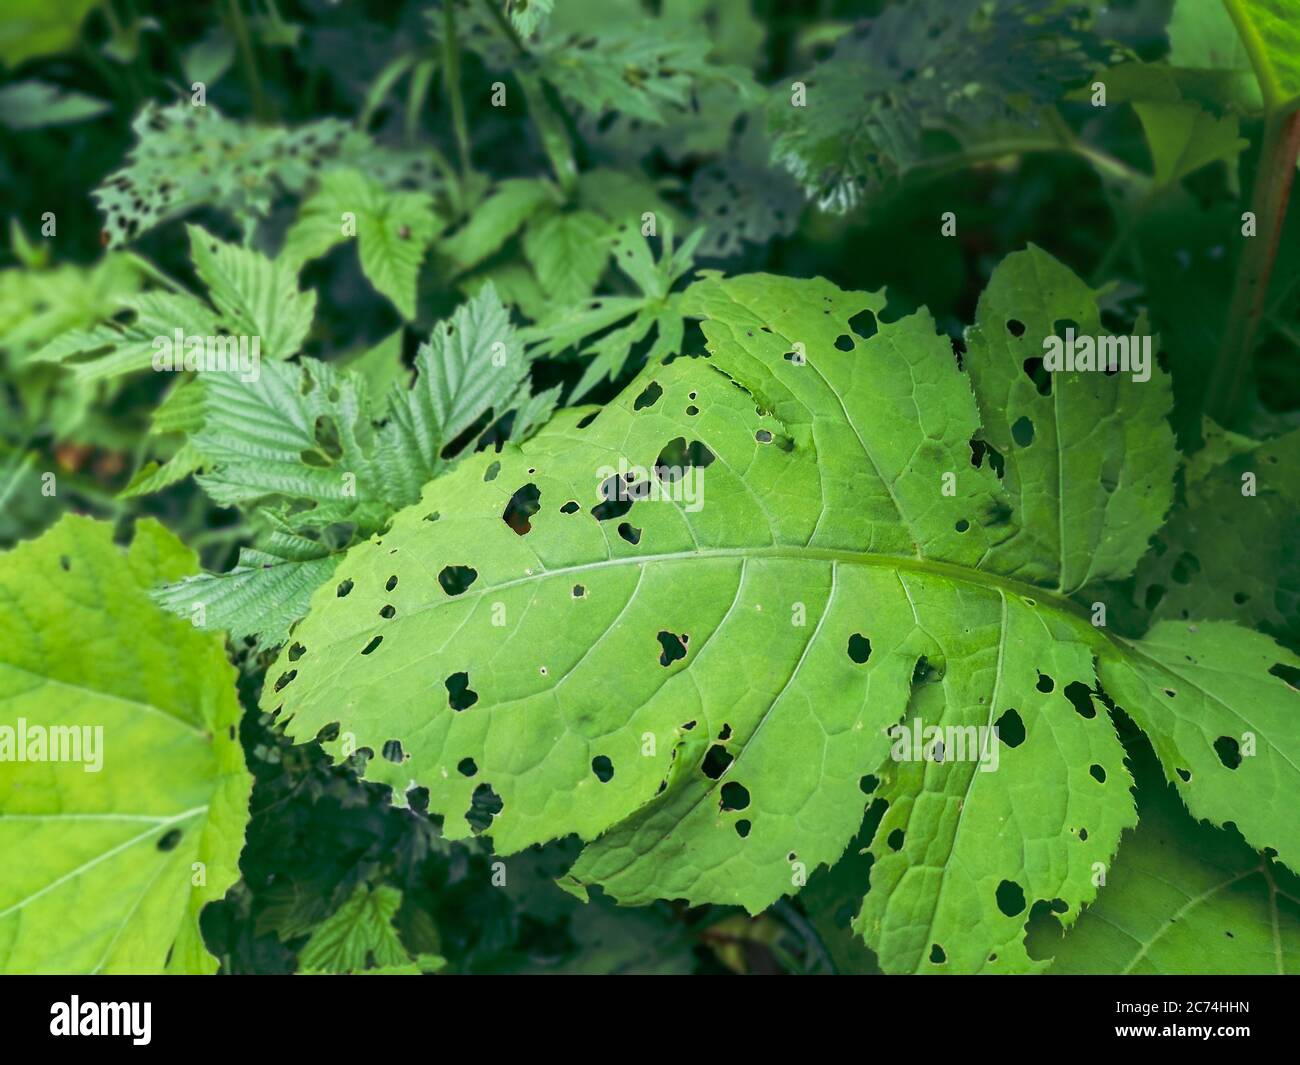 Big heart-shaped greeen leaf full of holes made by insects. Wild wet mountain forest foliage background. Stock Photo